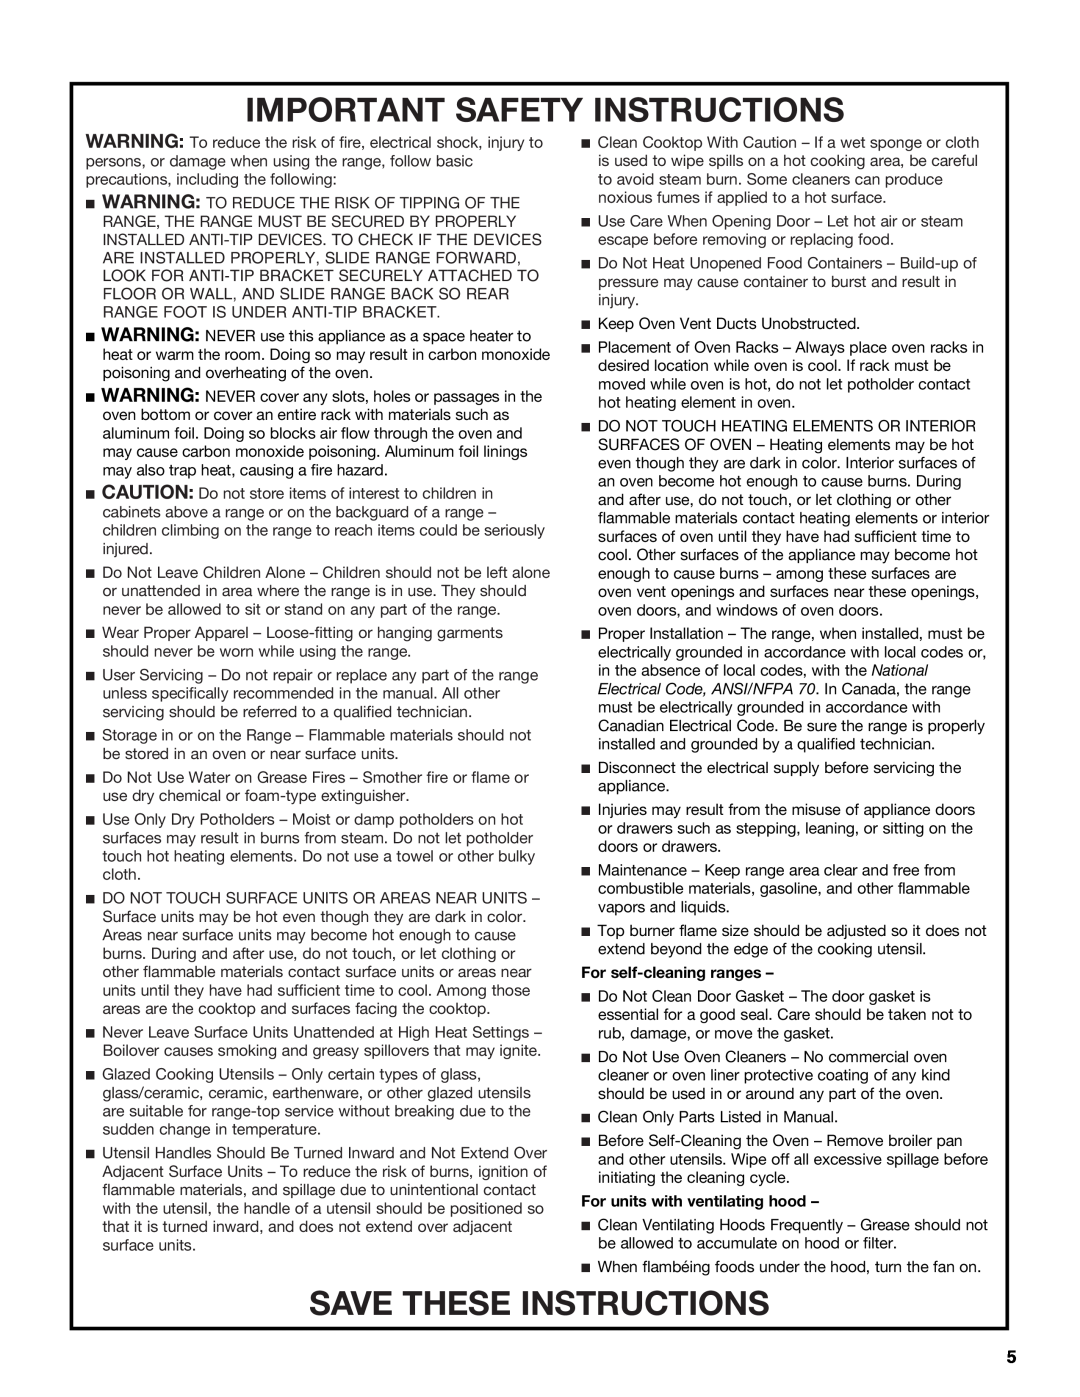 KitchenAid KDRS505XSS manual Important Safety Instructions, Save These Instructions, For self-cleaning ranges 